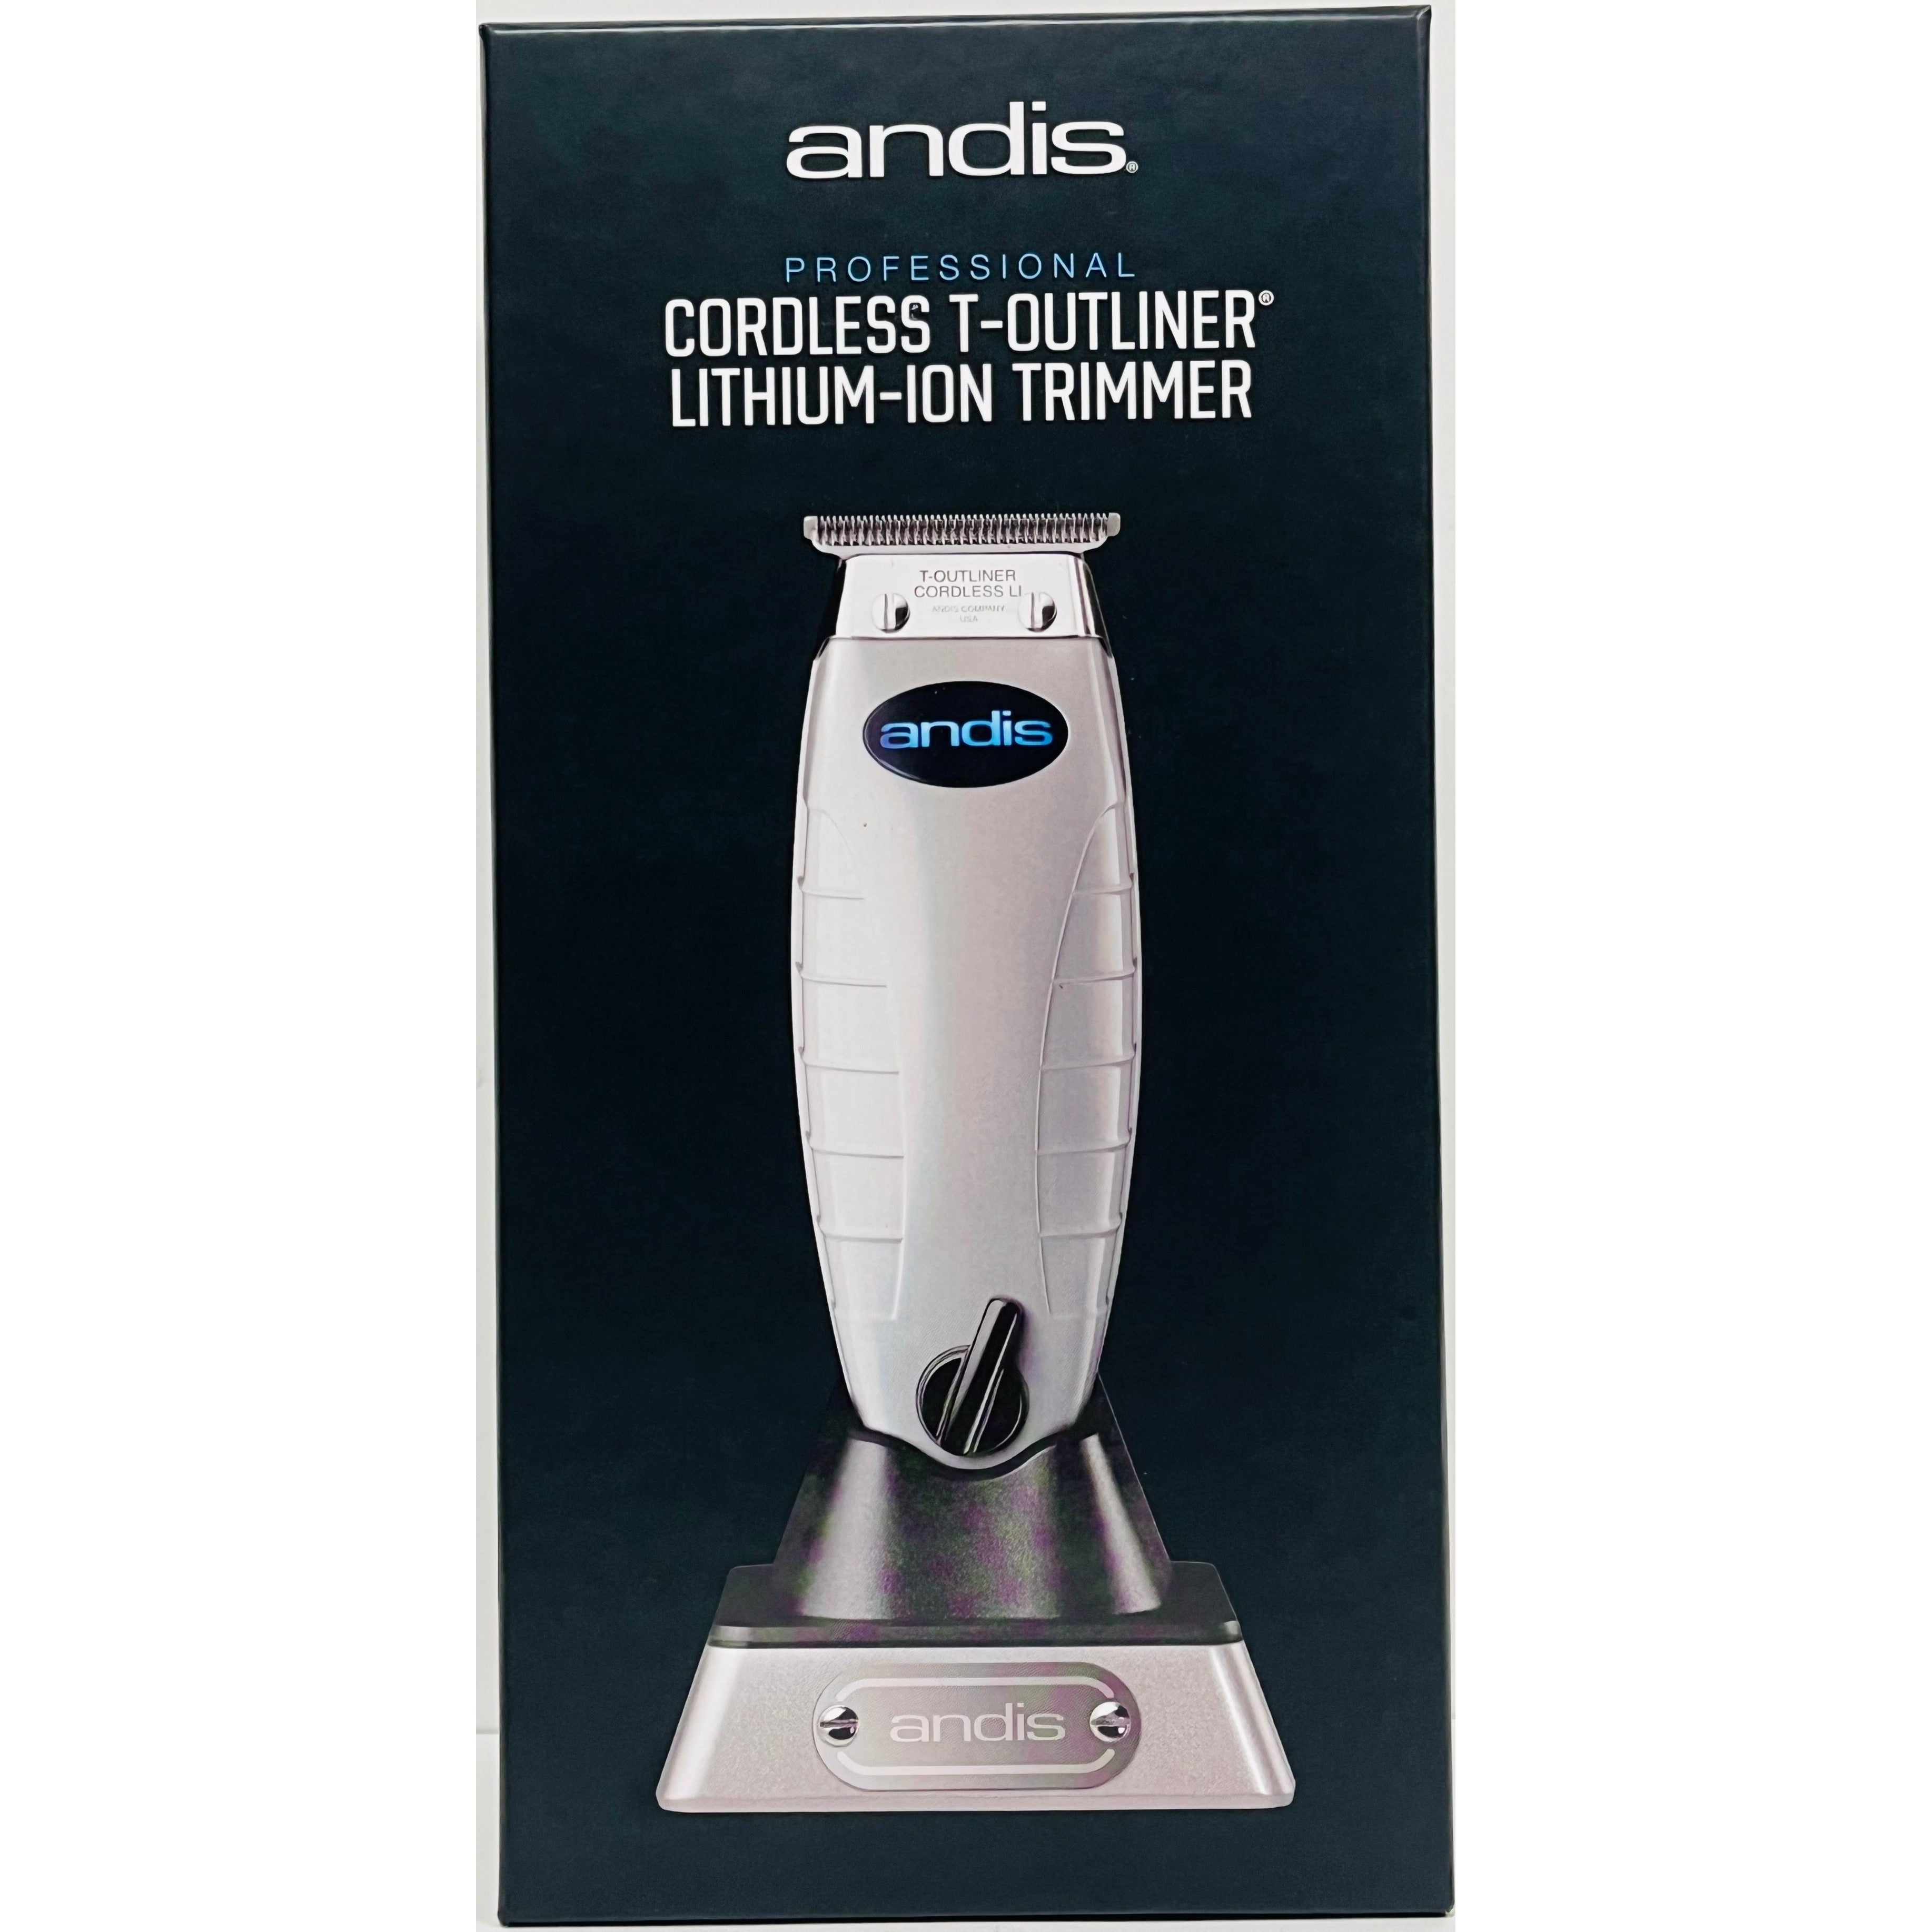 Andis 74000 Professional Cordless T-Outliner Li-Ion Trimmer Dual Voltage NEW